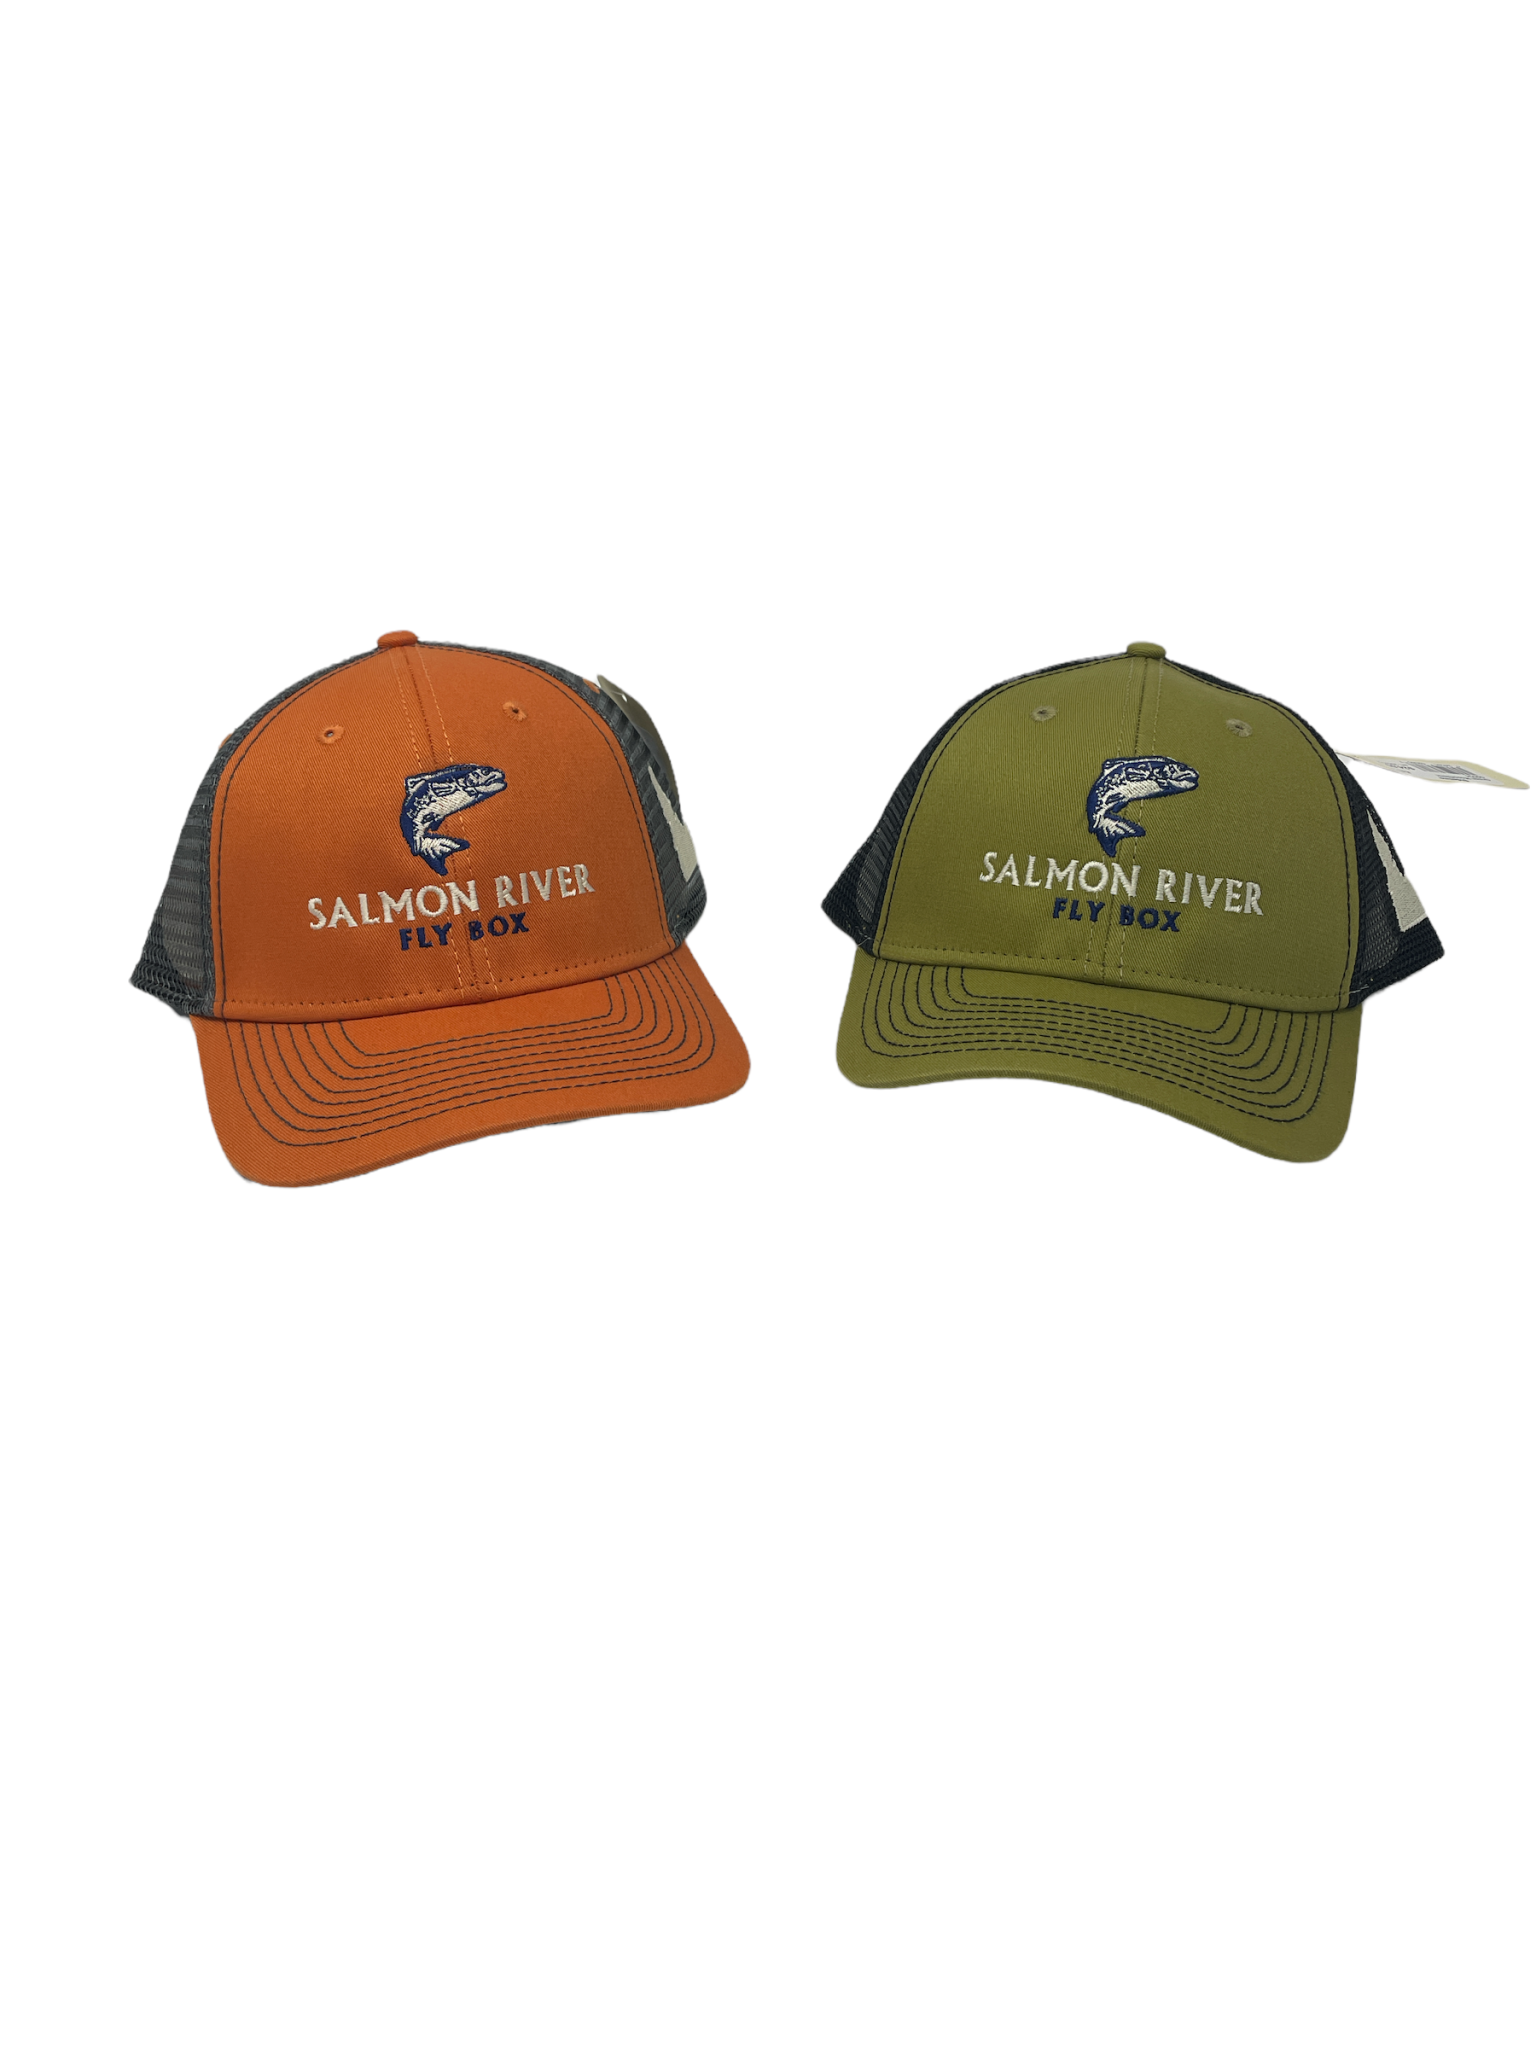 Salmon River Fly Box Sideline Hat - Salmon River Fly Box